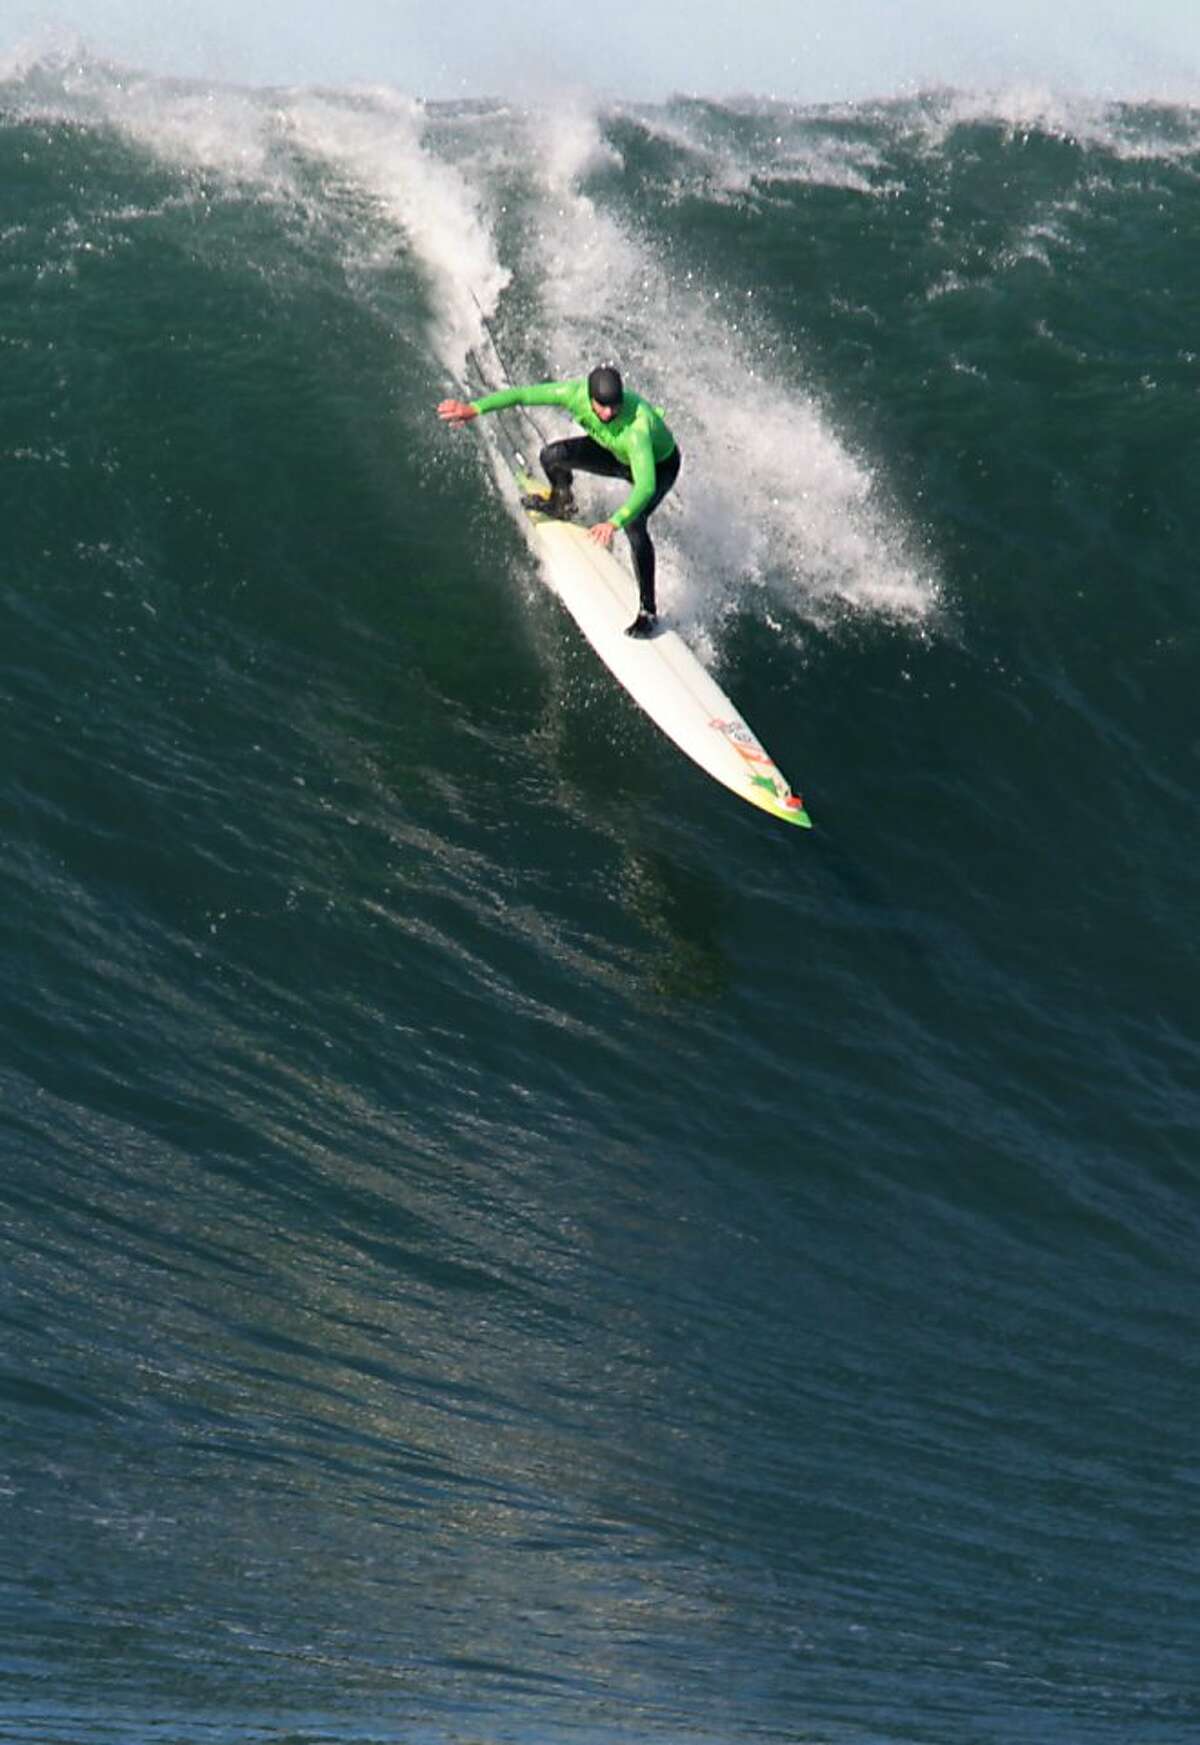 Grant Baker drops into a wave during the first round of the Mavericks Invitational on Sunday, January 20, 2013.